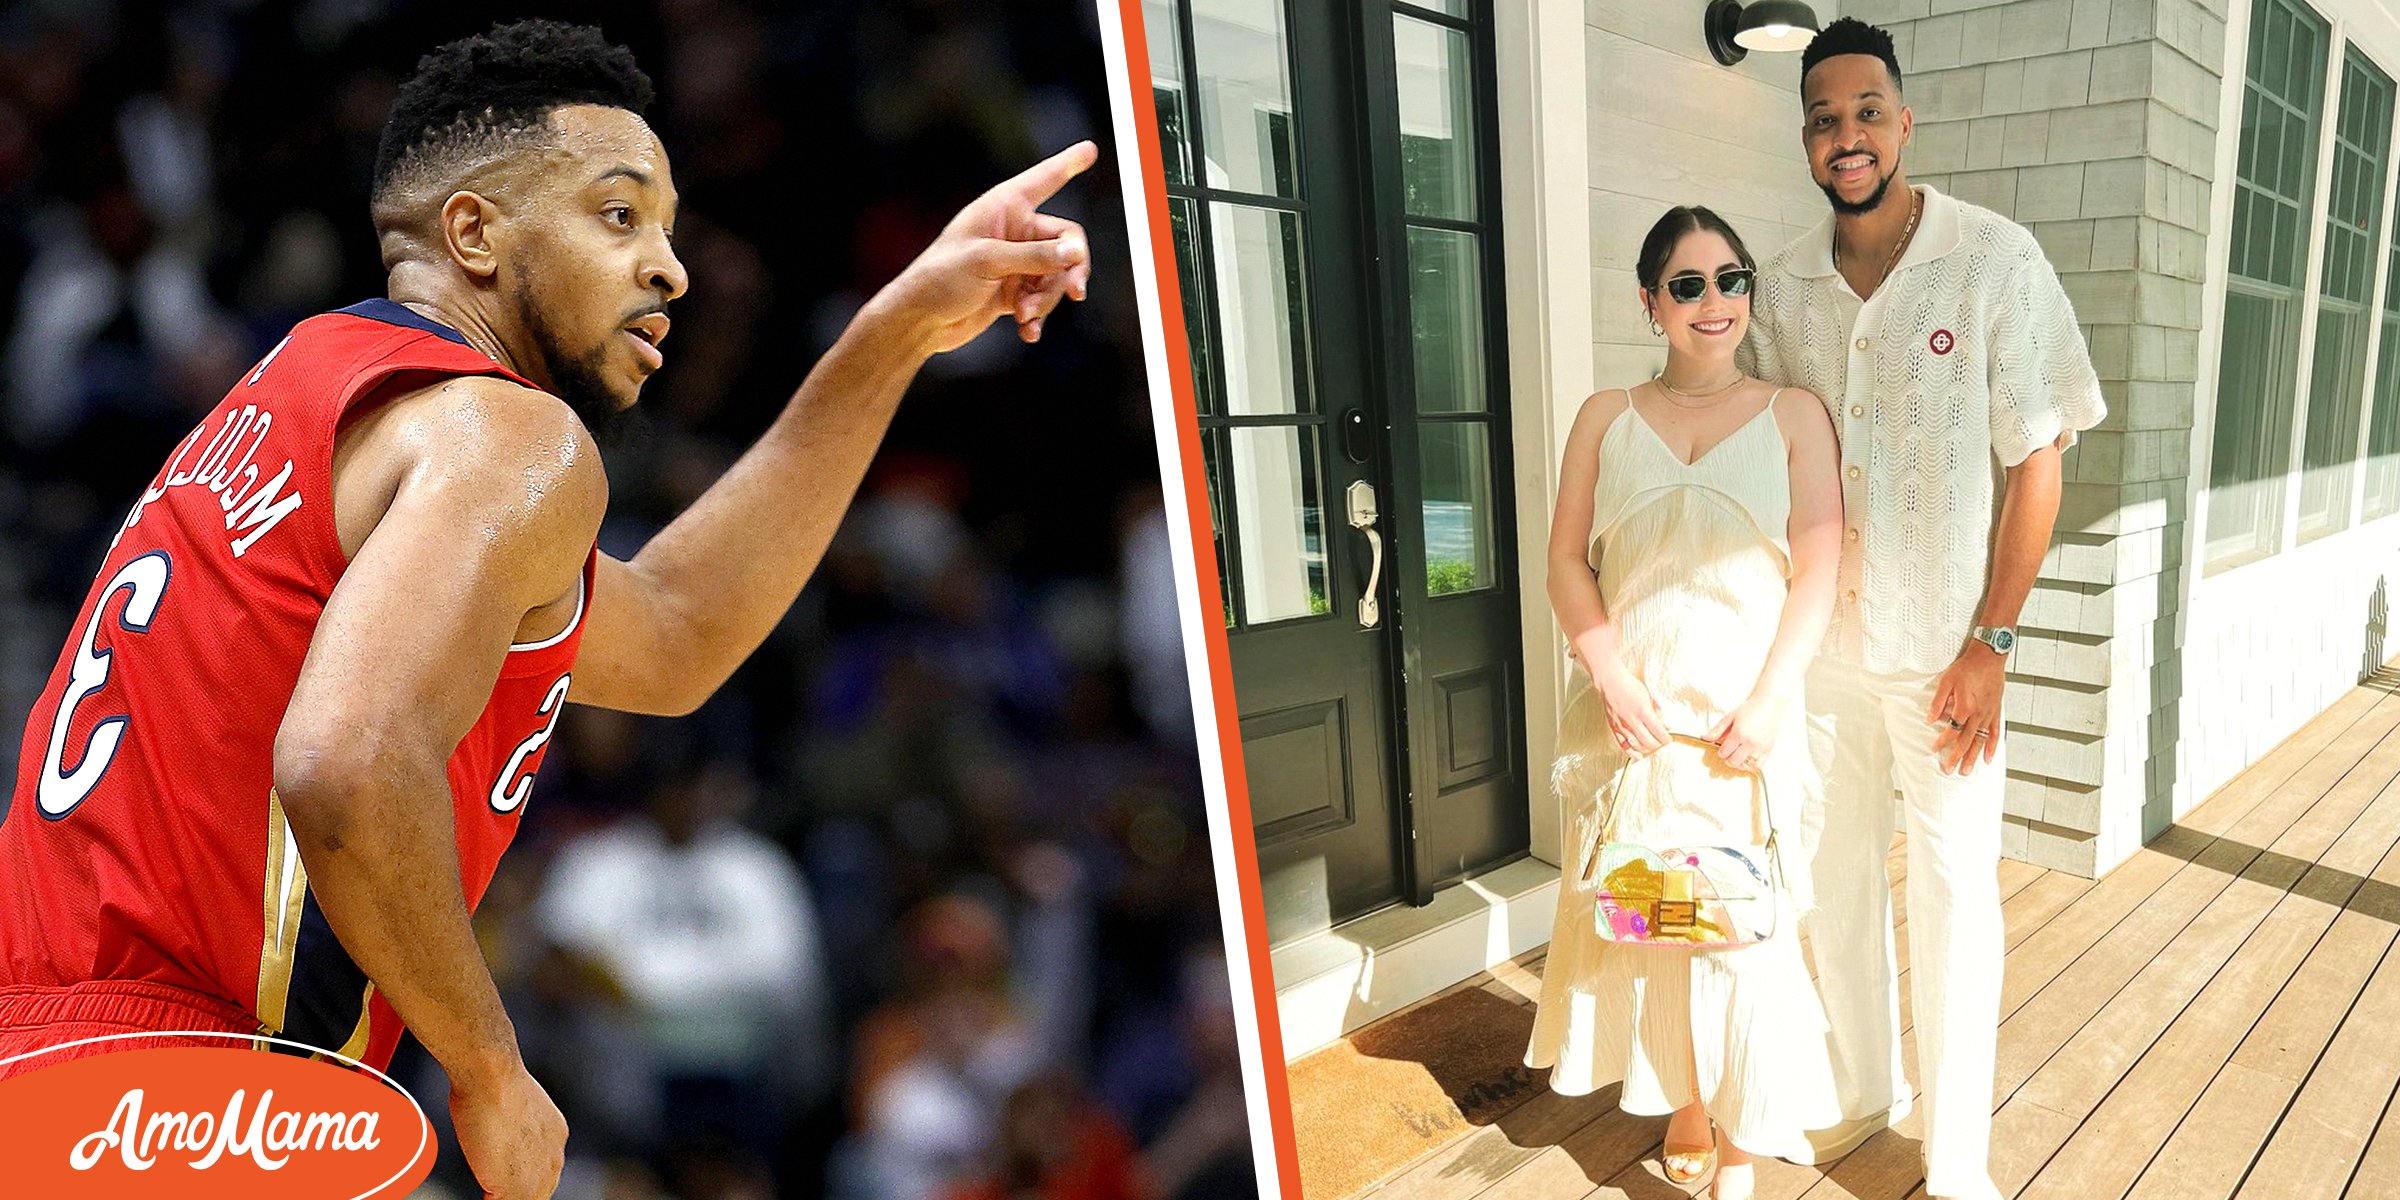 CJ McCollum’s Wife Has Been by His Side before He Became a NBA Player – More about Elise Esposito